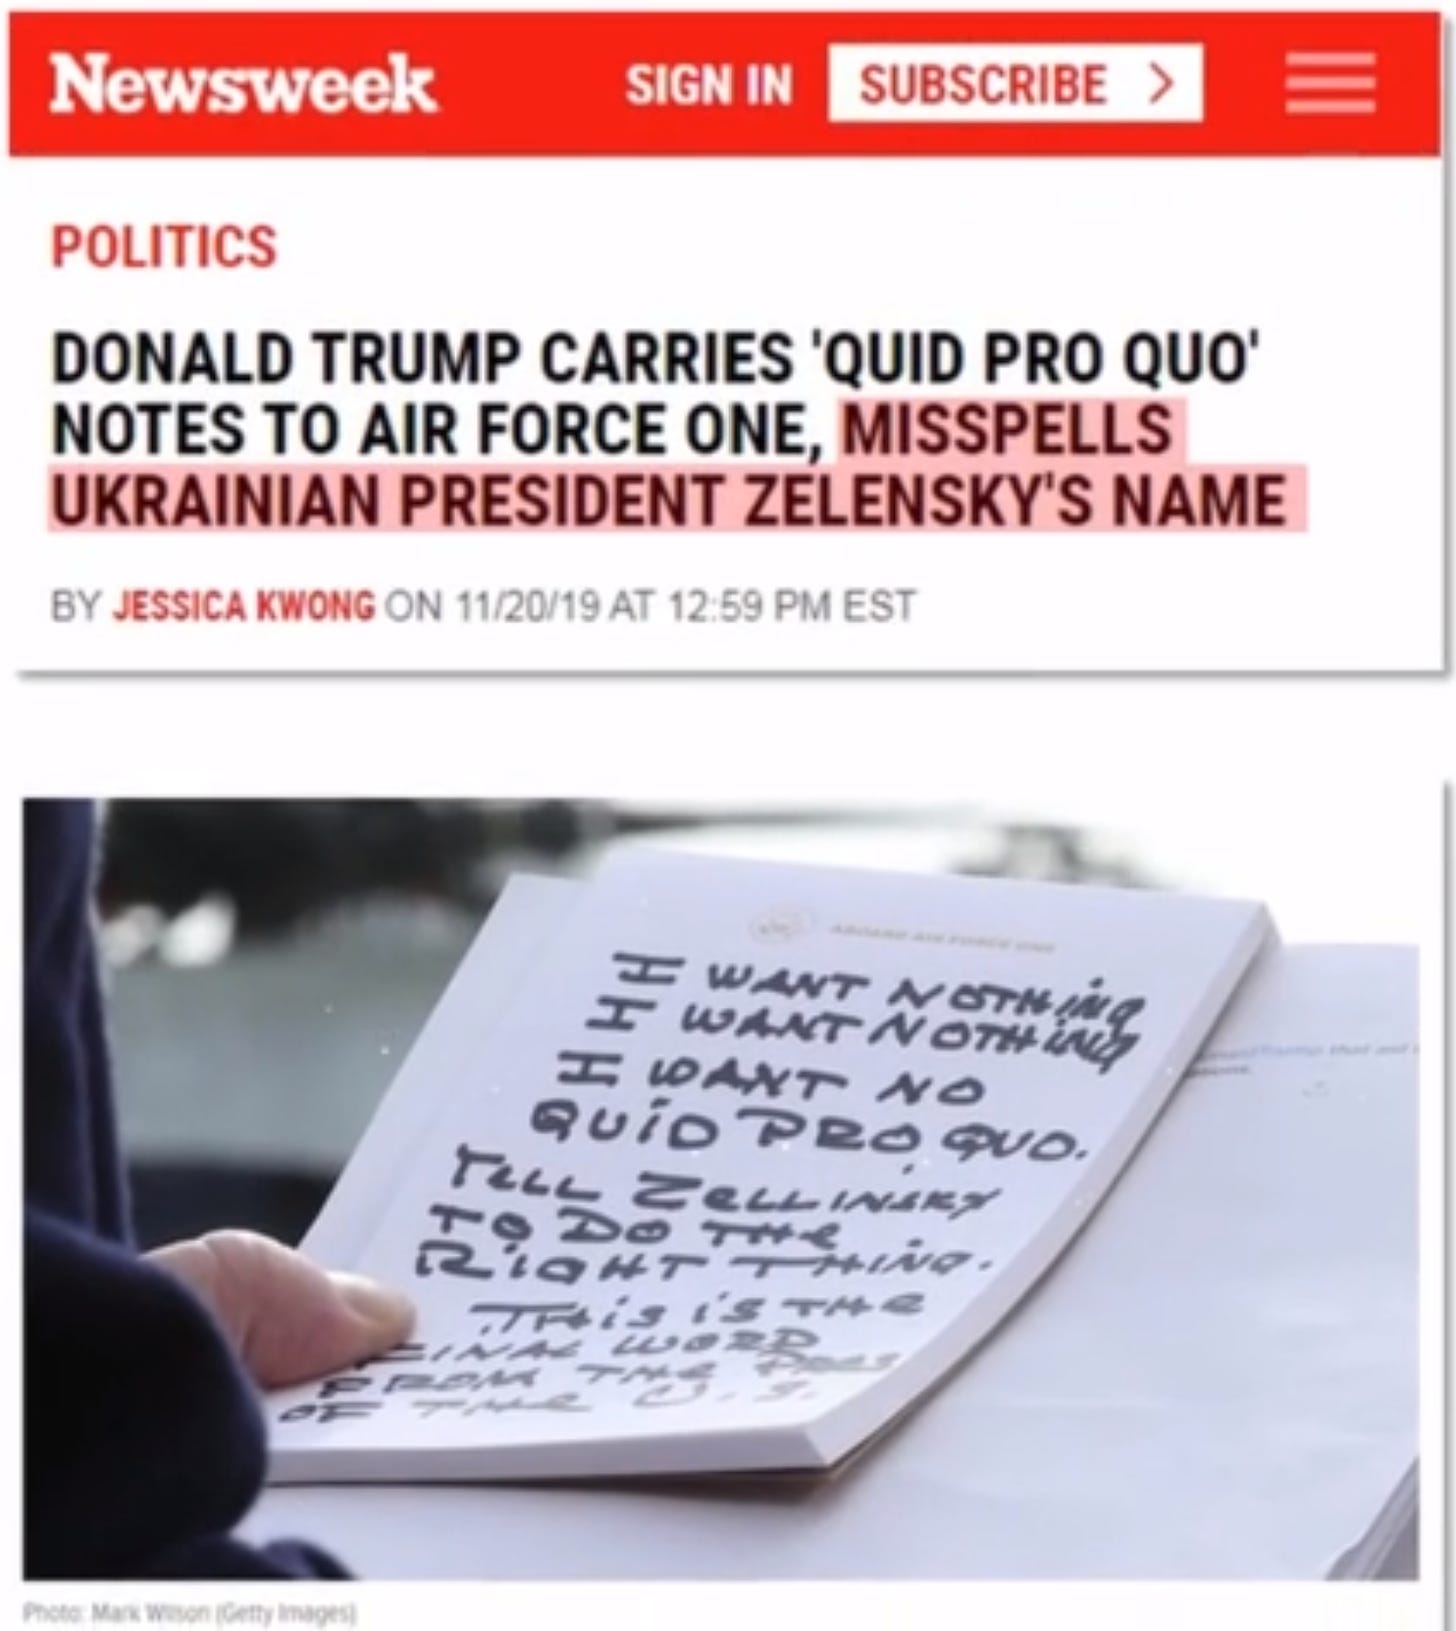 Newsweek 
POLITICS 
SIGN IN 
SUBSCRIBE > 
DONALD TRUMP CARRIES 'QUID PRO QUO' 
NOTES TO AIR FORCE ONE, MISSPELLS 
UKRAINIAN PRESIDENT ZELENSKYS NAME 
BY ÆSSICA KWONG ON 1120/19 AT 12 59 PM EST 